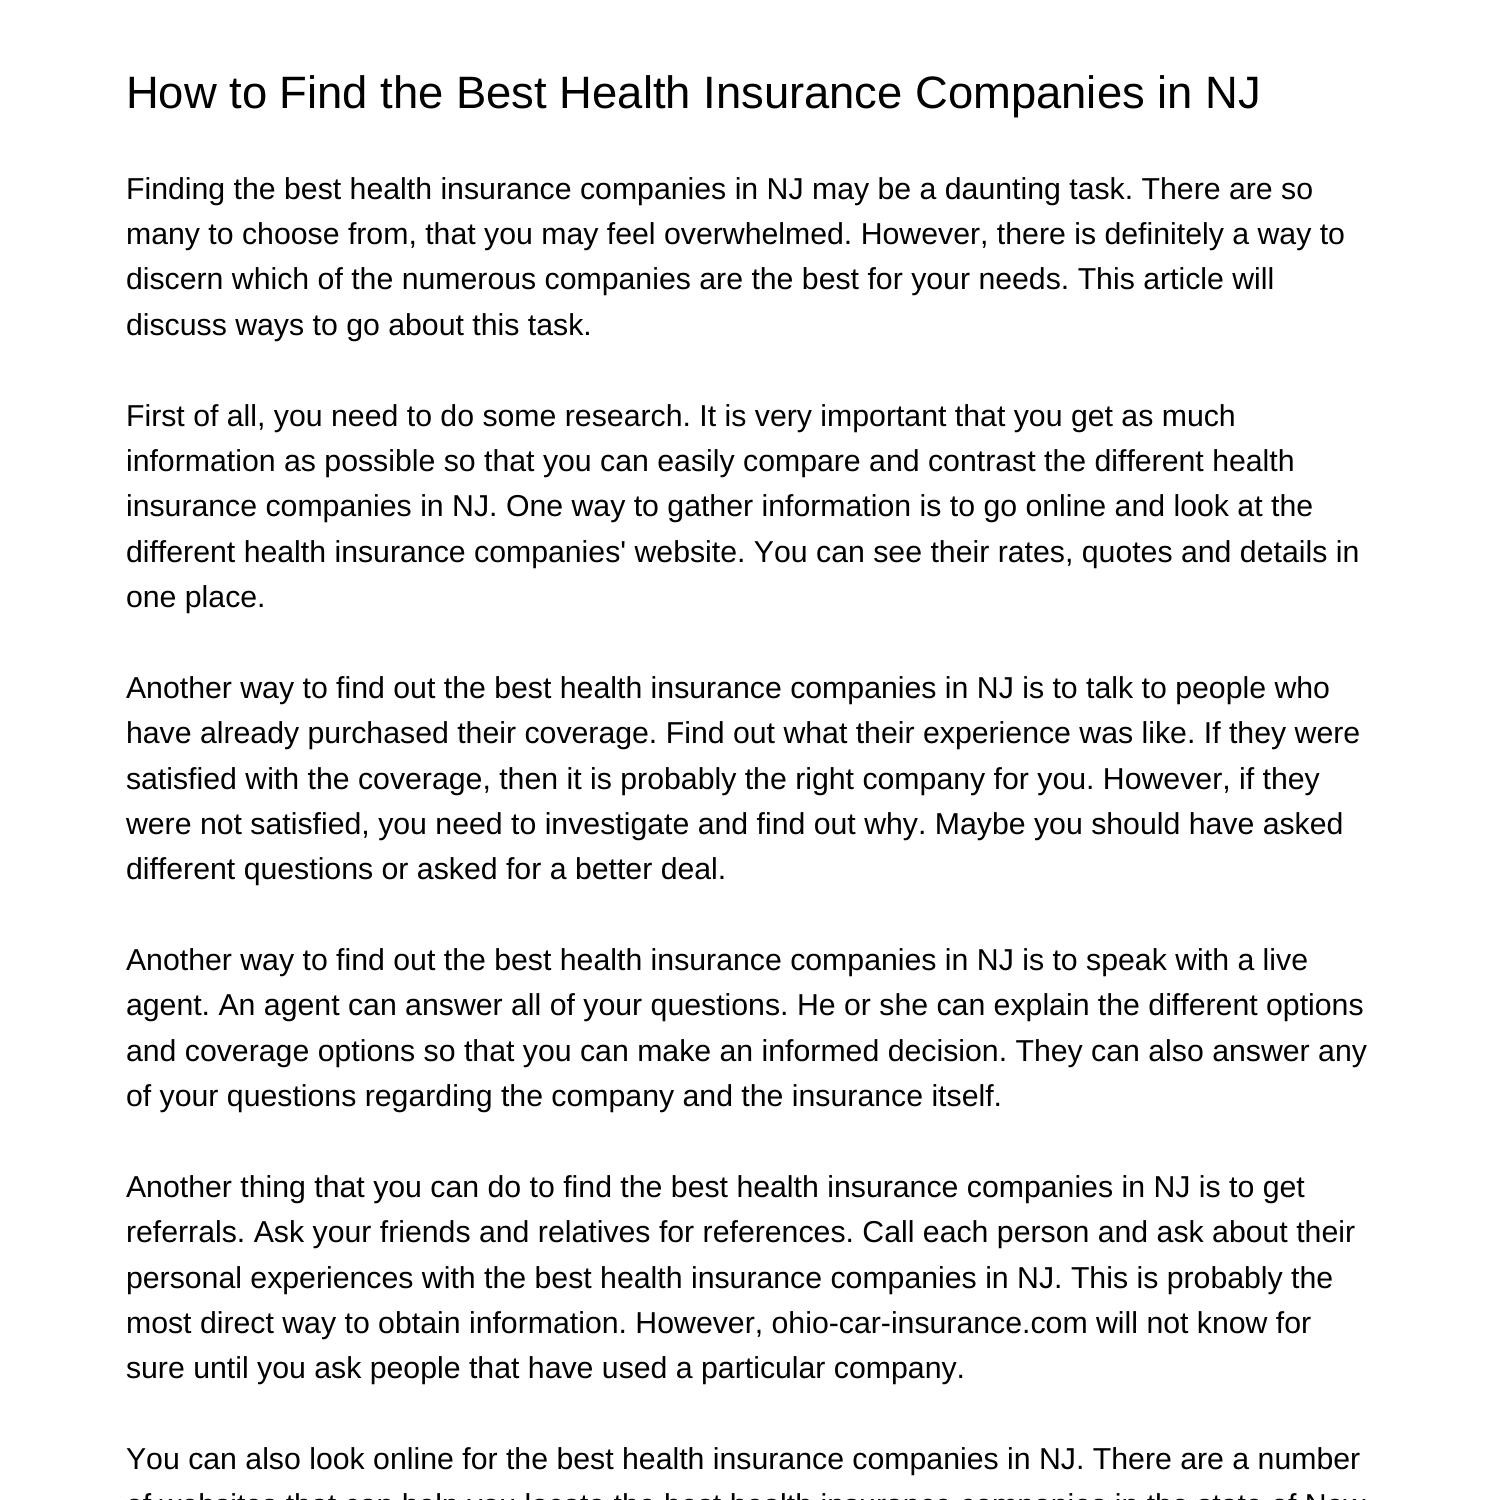 How to Find the Best Health Insurance Companies in NJliant.pdf.pdf